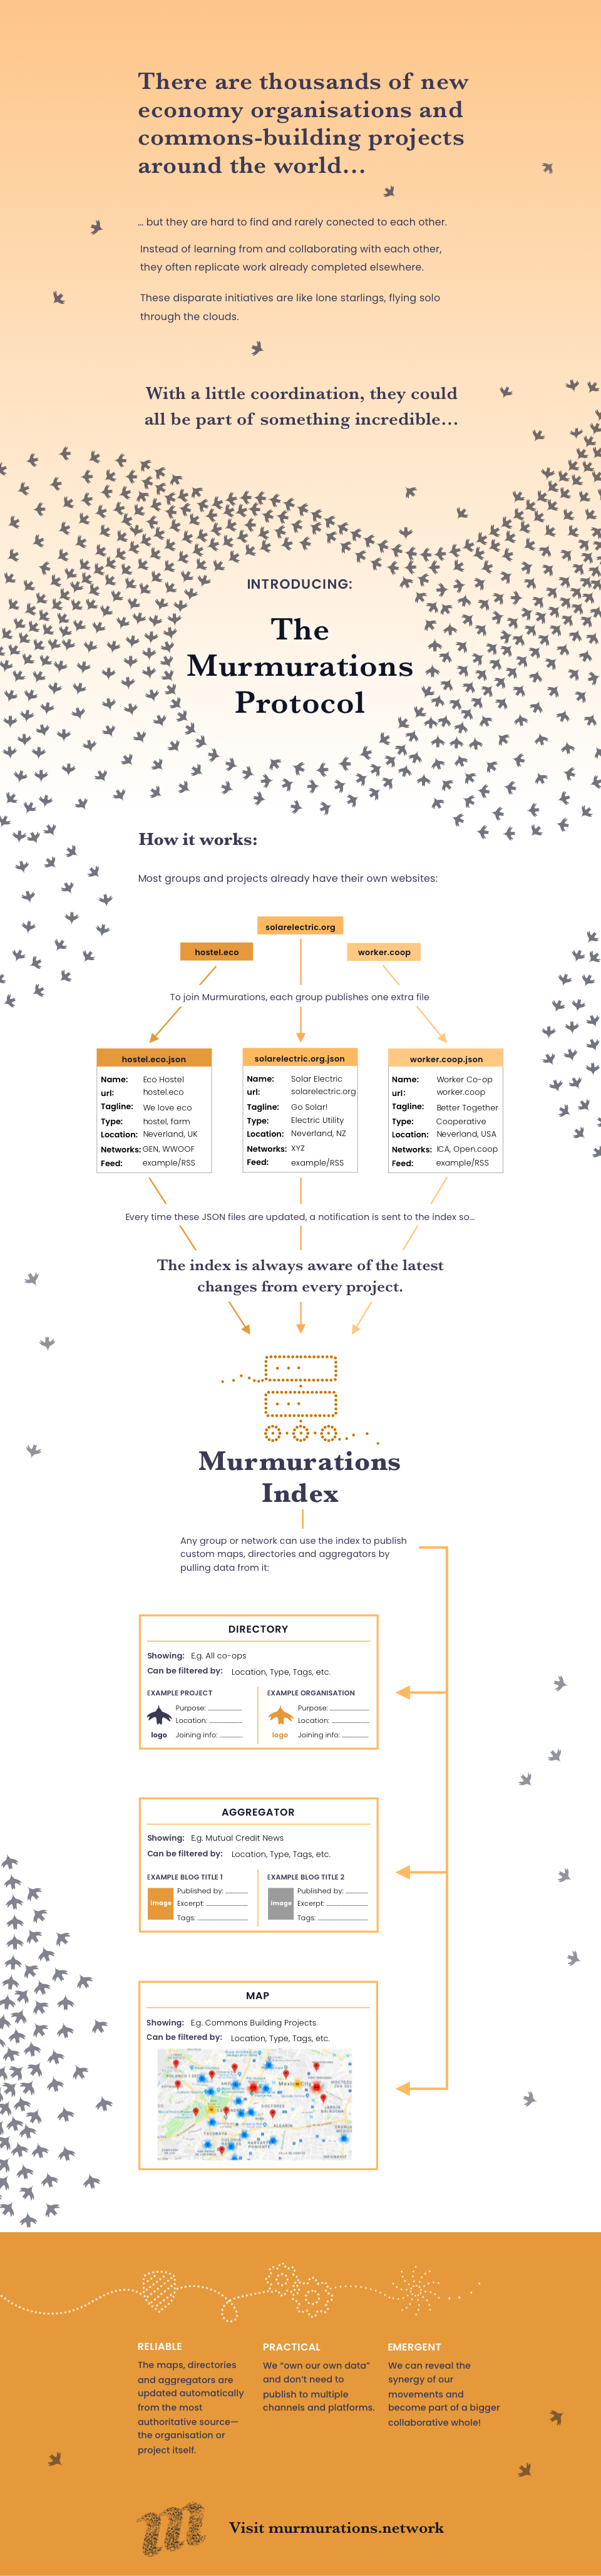 Murmurations Overview Infographic